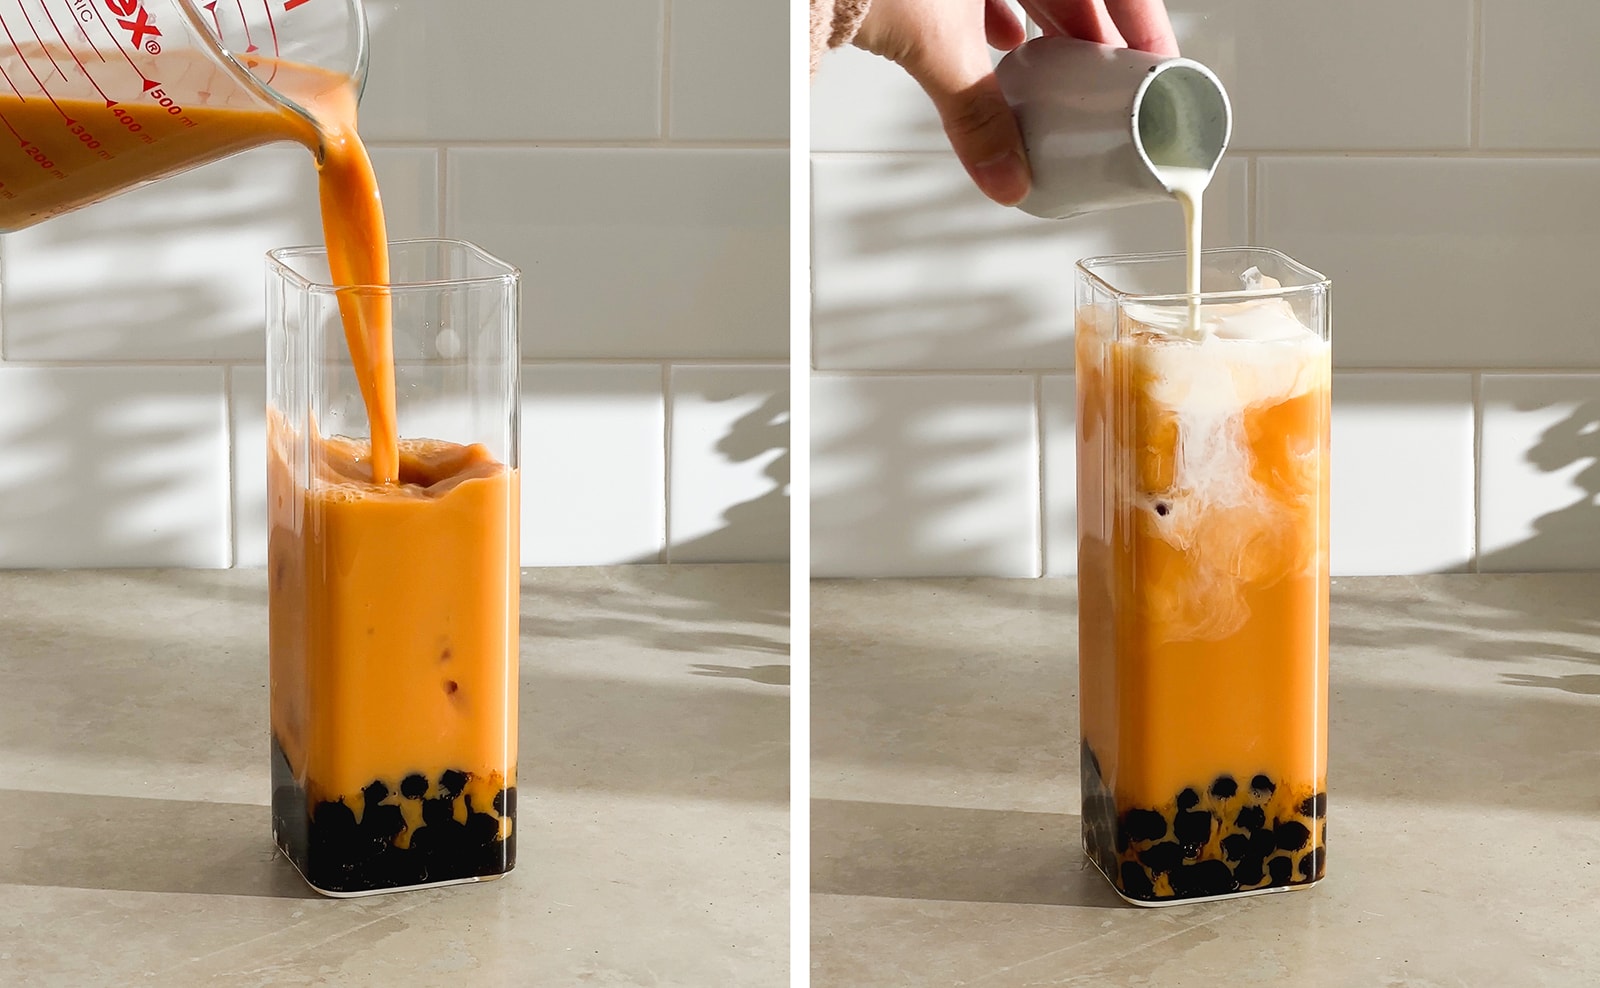 Left to right: pouring Thai milk tea into glass filled with boba pearls, pouring cream on top of Thai milk tea in glass.